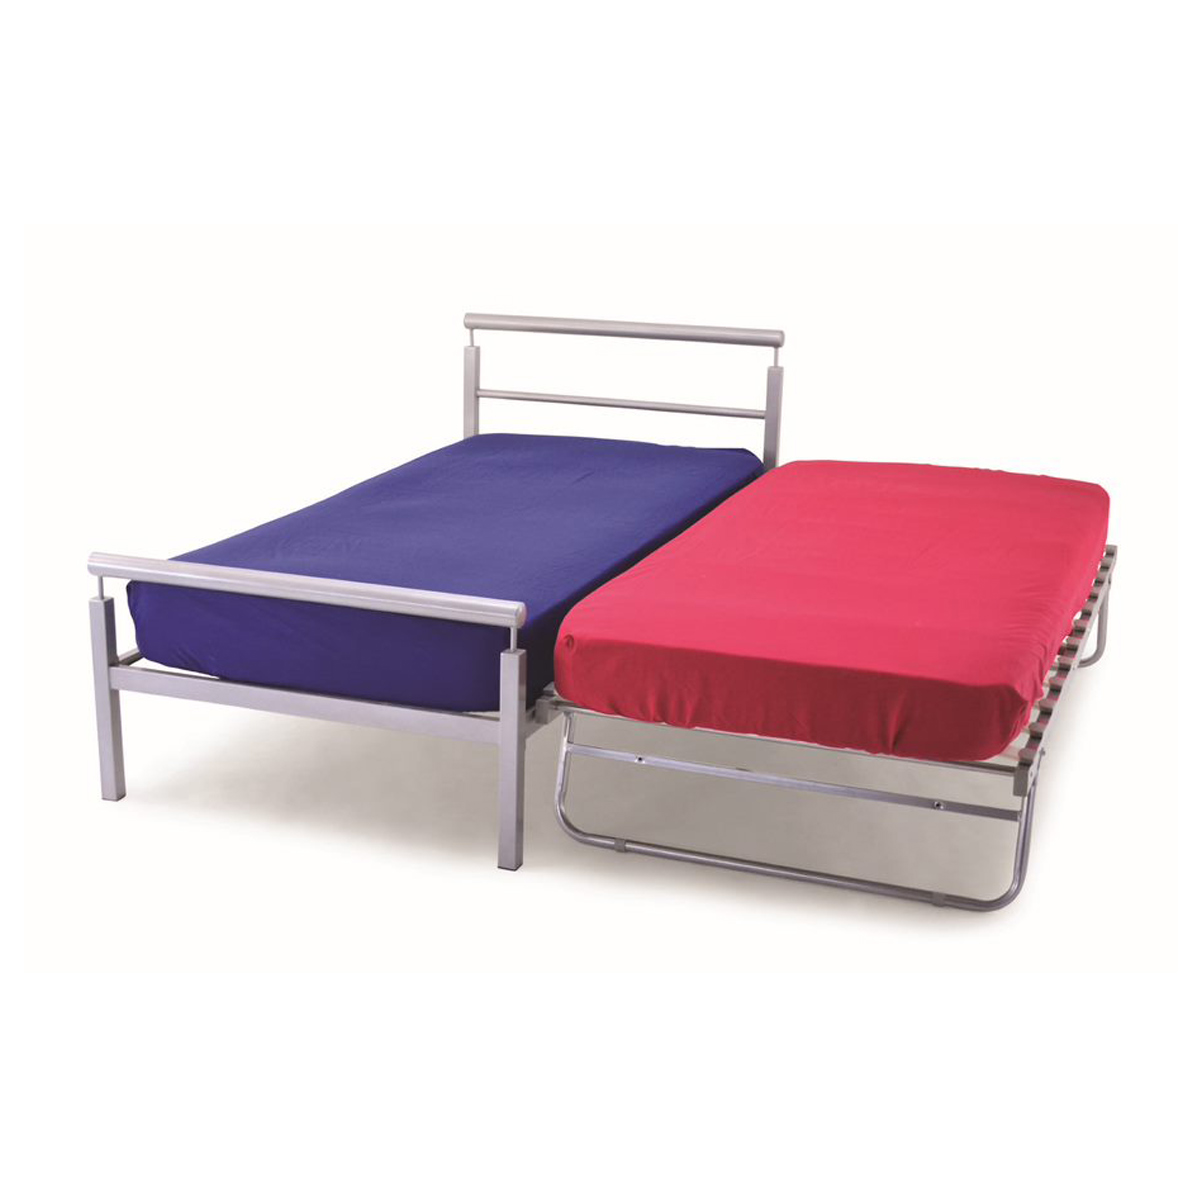 bunk bed with guest bed